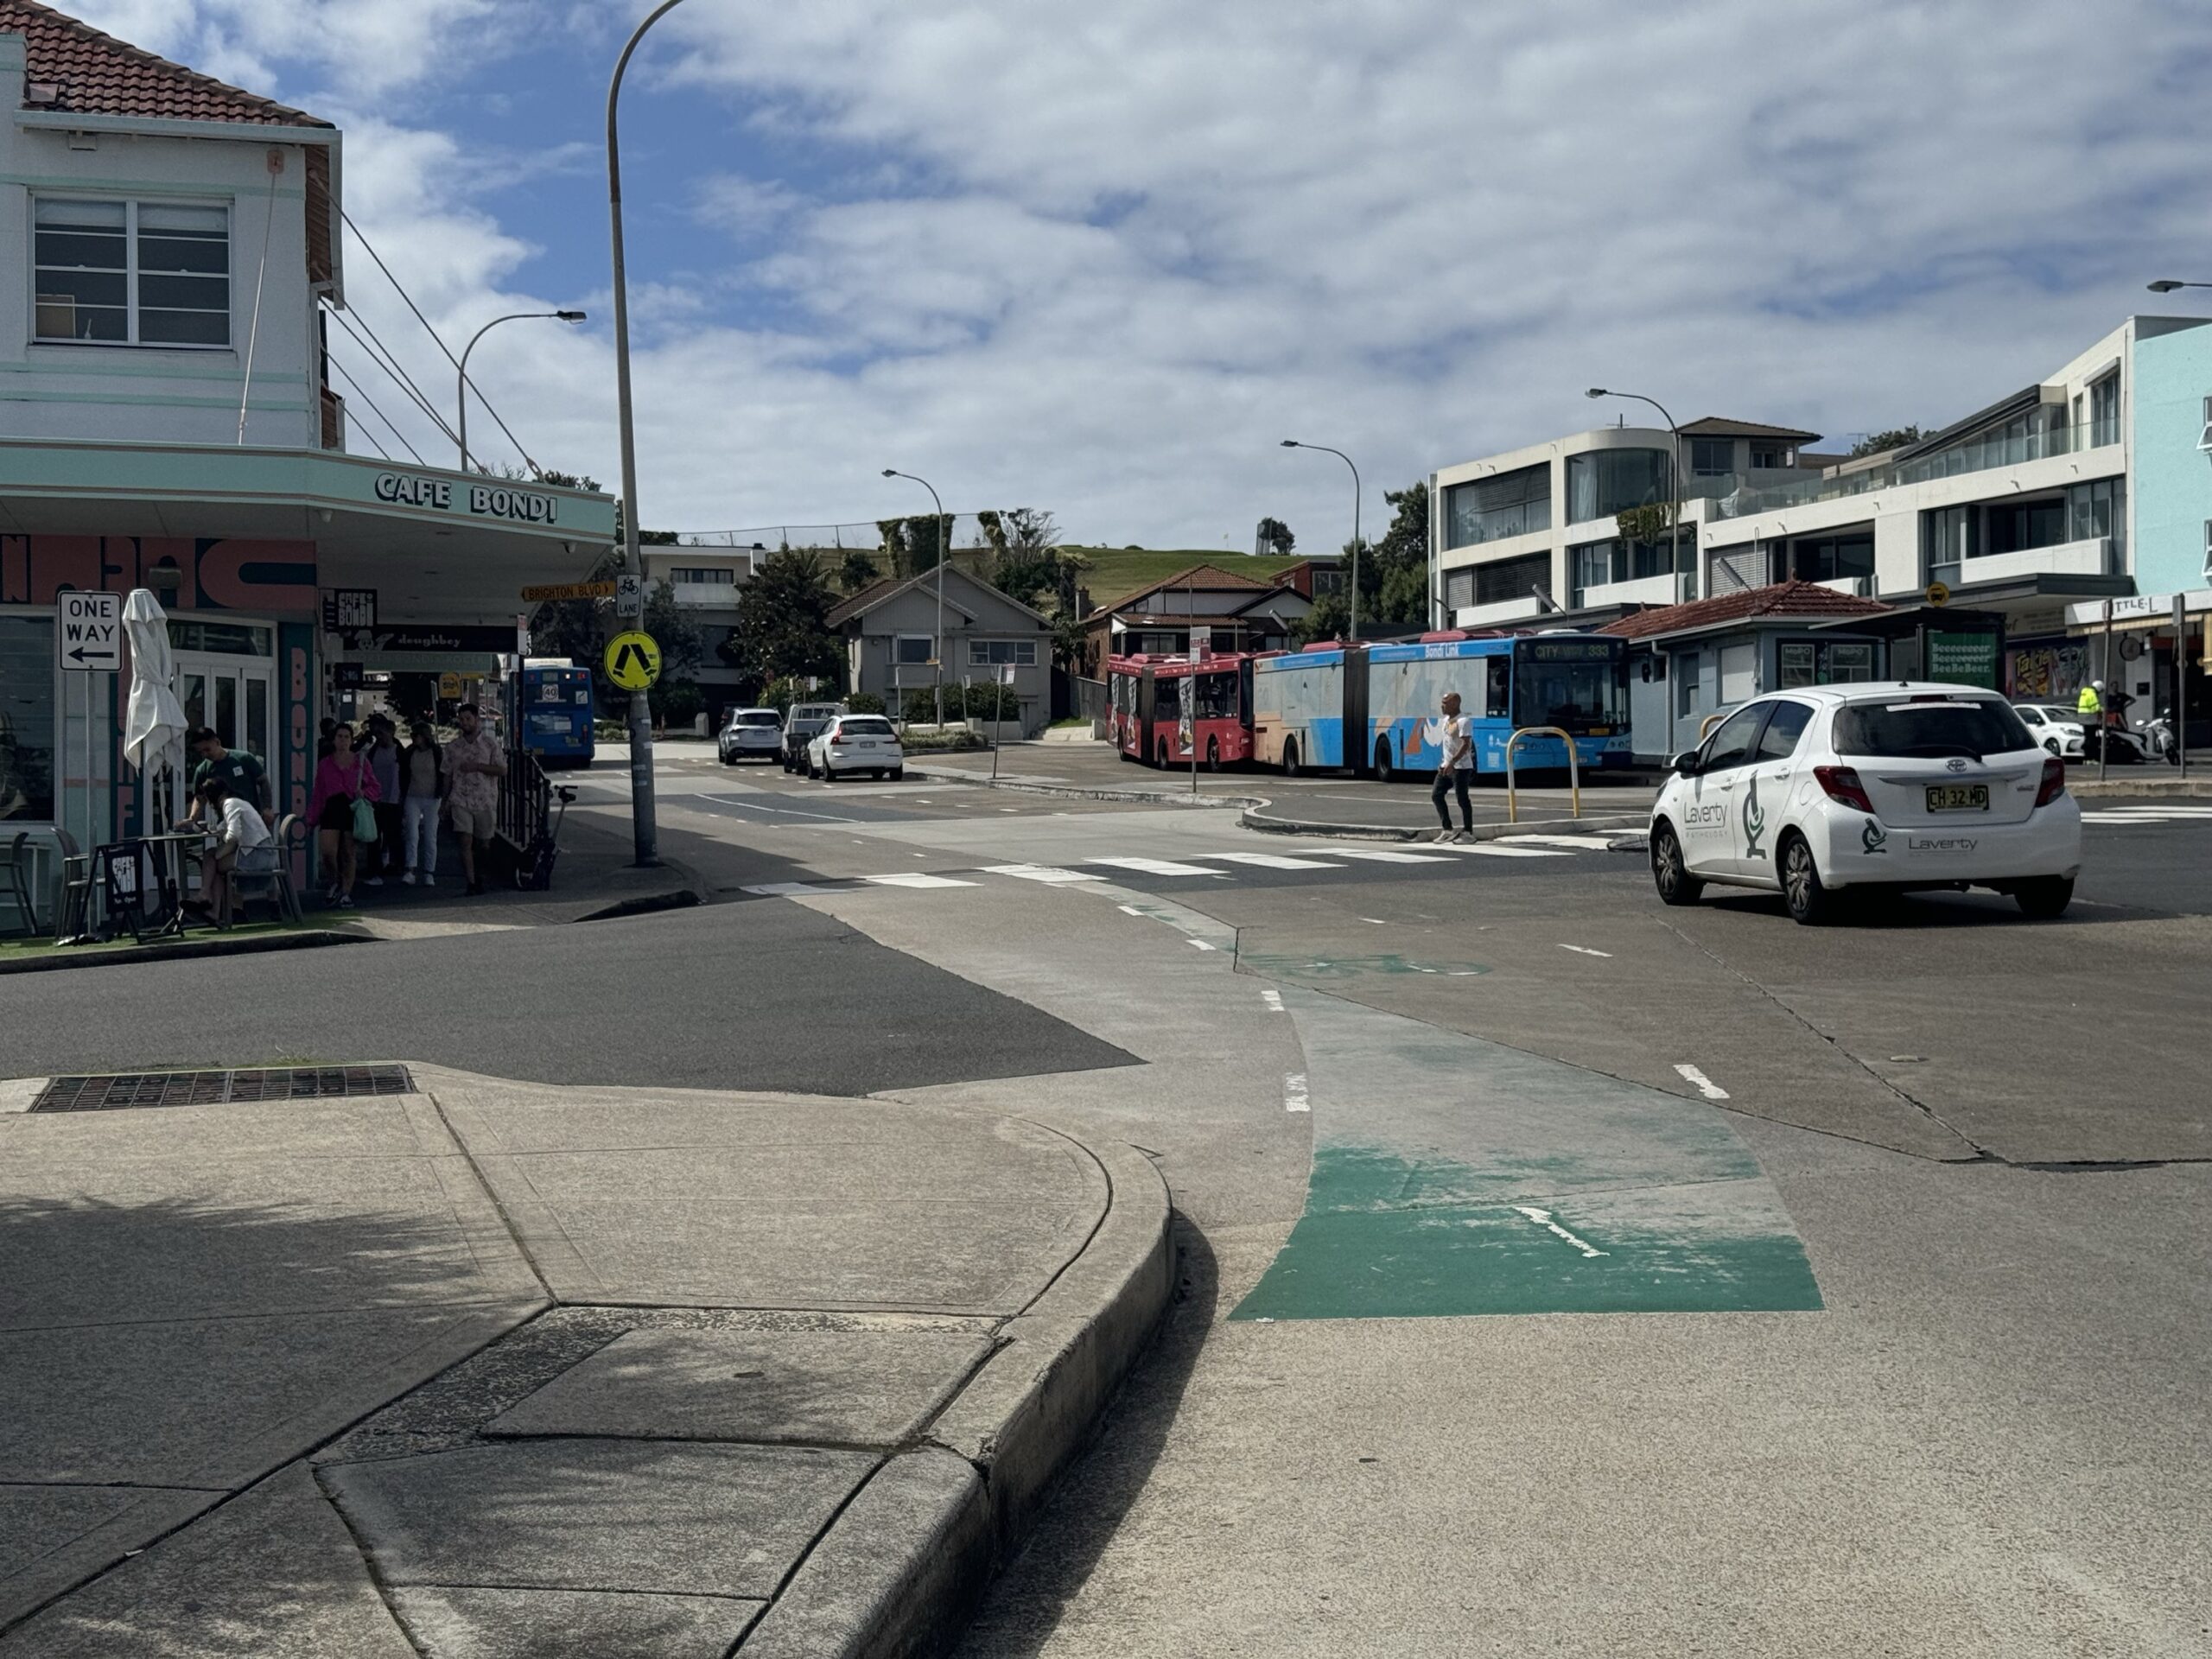 Better Streets submission to the North Bondi Shops and Bus Terminus Upgrade